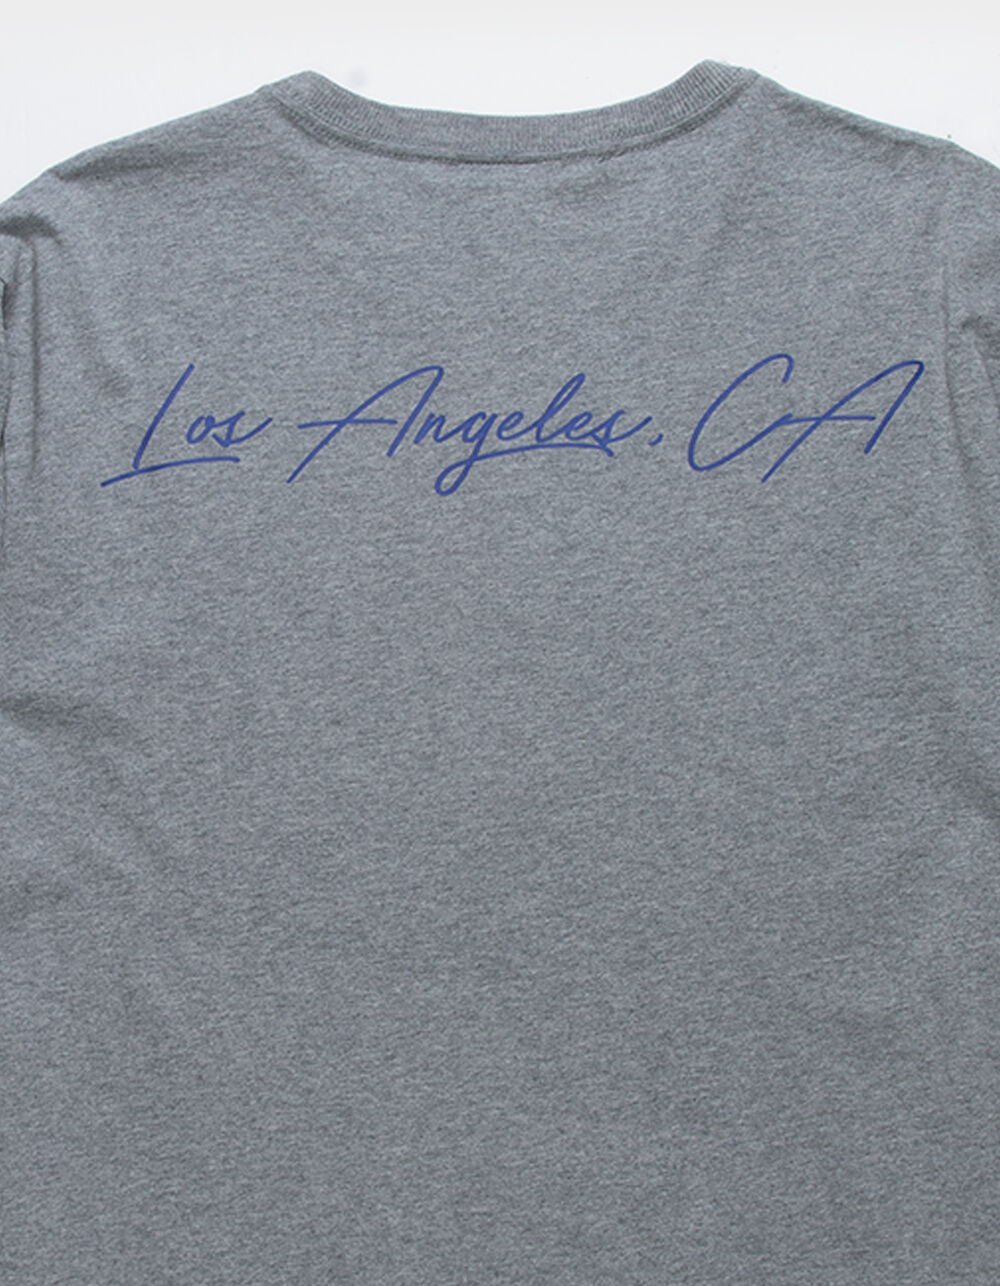 Dodger Dog Tee Los Angeles Dodgers - Shop Mitchell & Ness Shirts